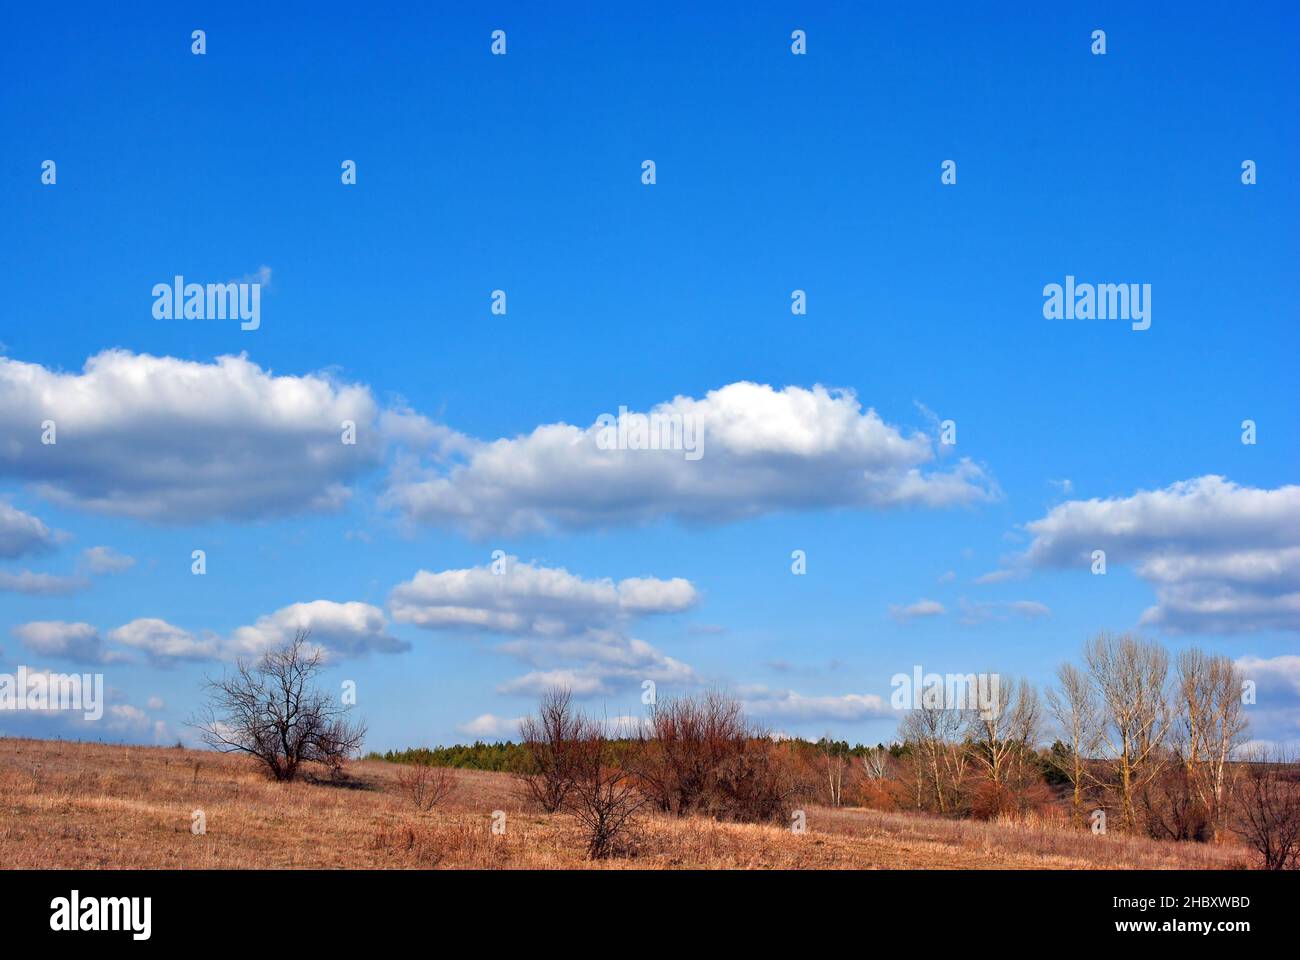 Hill with bushes, spring landscape, blue cloudy sky background Stock Photo